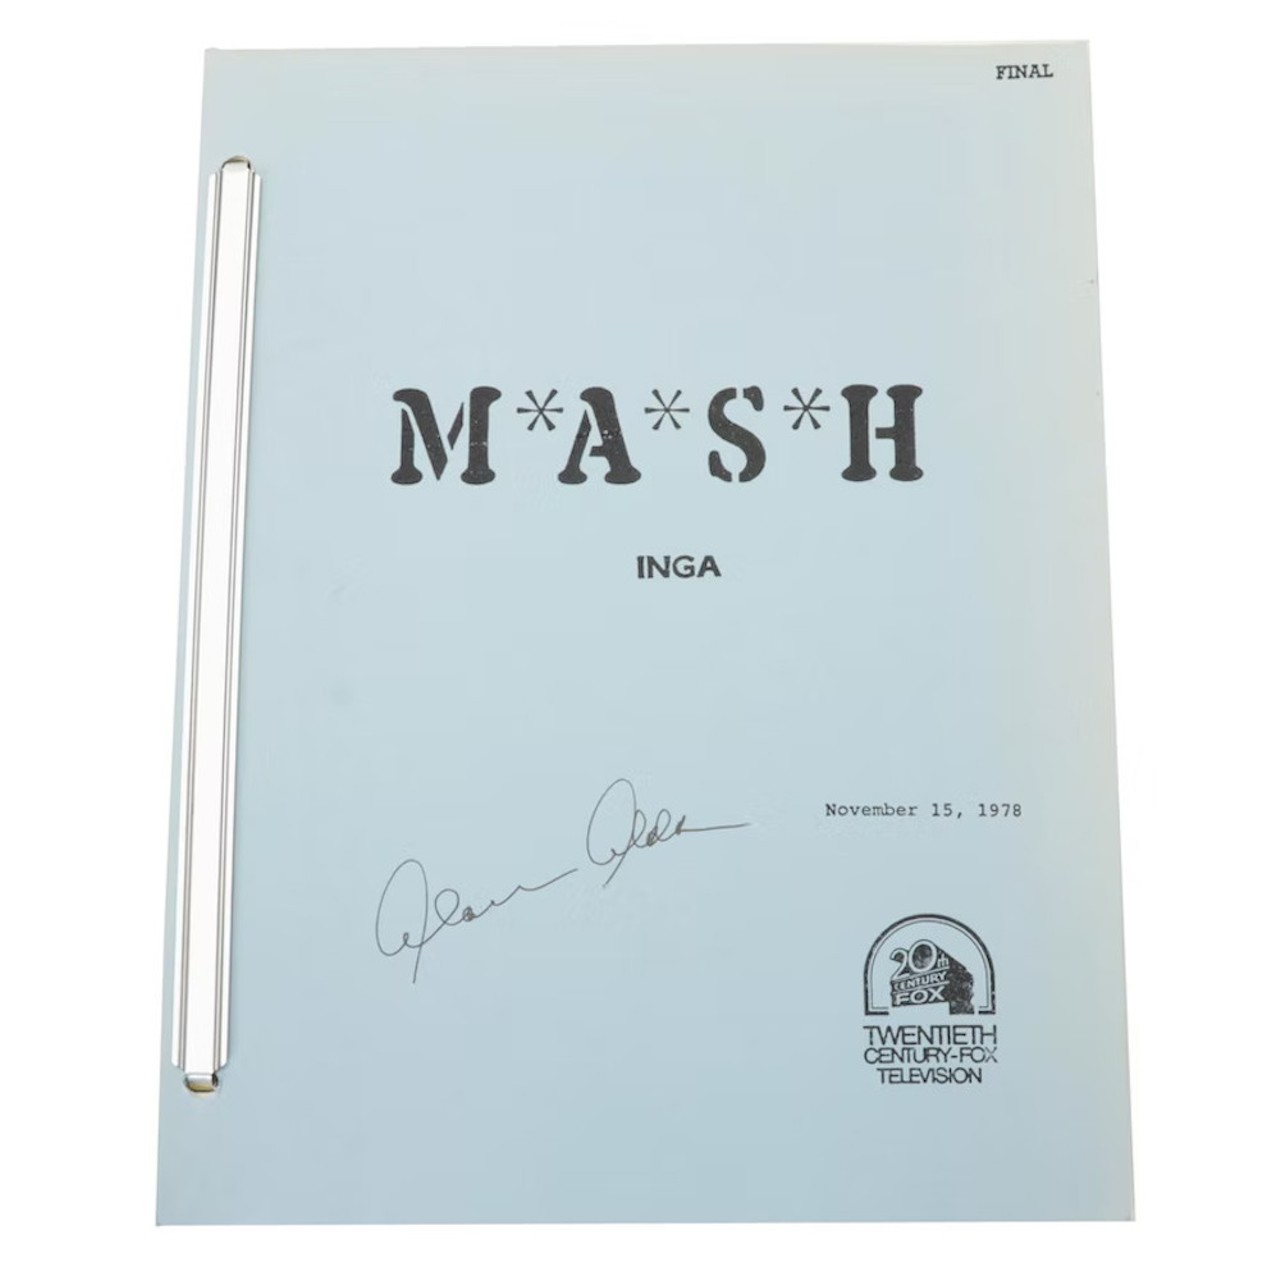 Alan Alda Signed M*A*S*H "Inga" TV Script, 1978
Chances are you have a parent or aunt or uncle who loved the show MASH. This gift is for them. From Season 7, Episode 17, this 1978 script is signed by Alan Alda, who played Captain Benjamin "Hawkeye" Pierce.